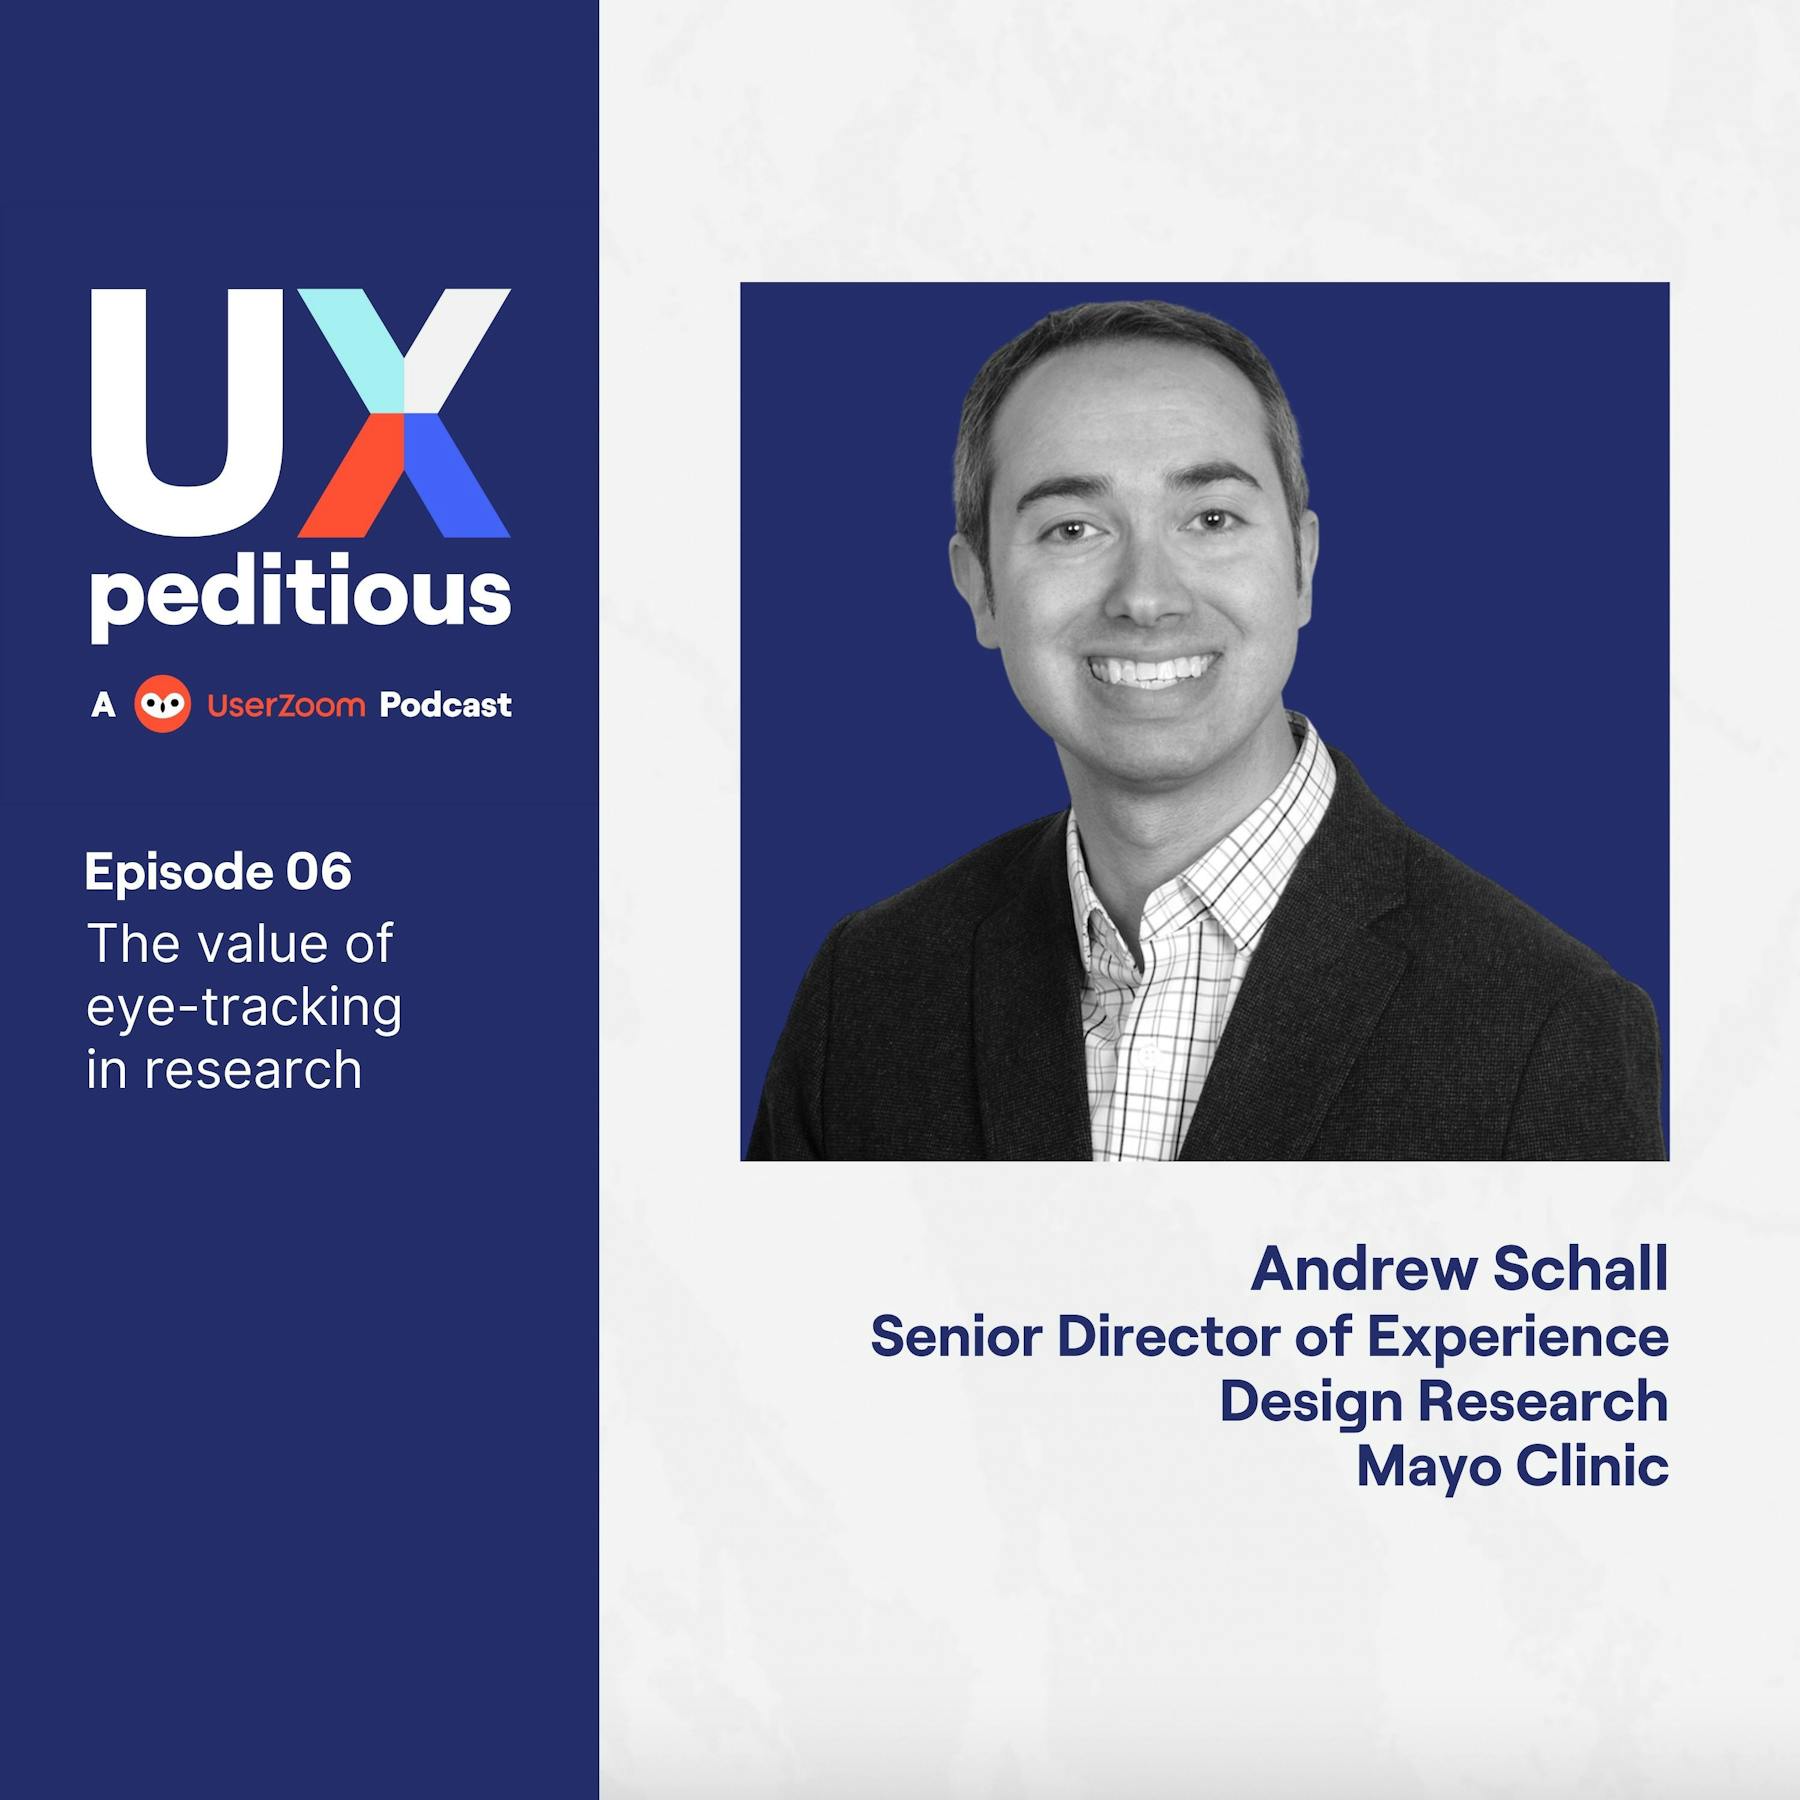 Andrew Schall, Senior Director of Experience Design Research, Mayo Clinic, shares his experience and expertise on how and when to use eye-tracking.